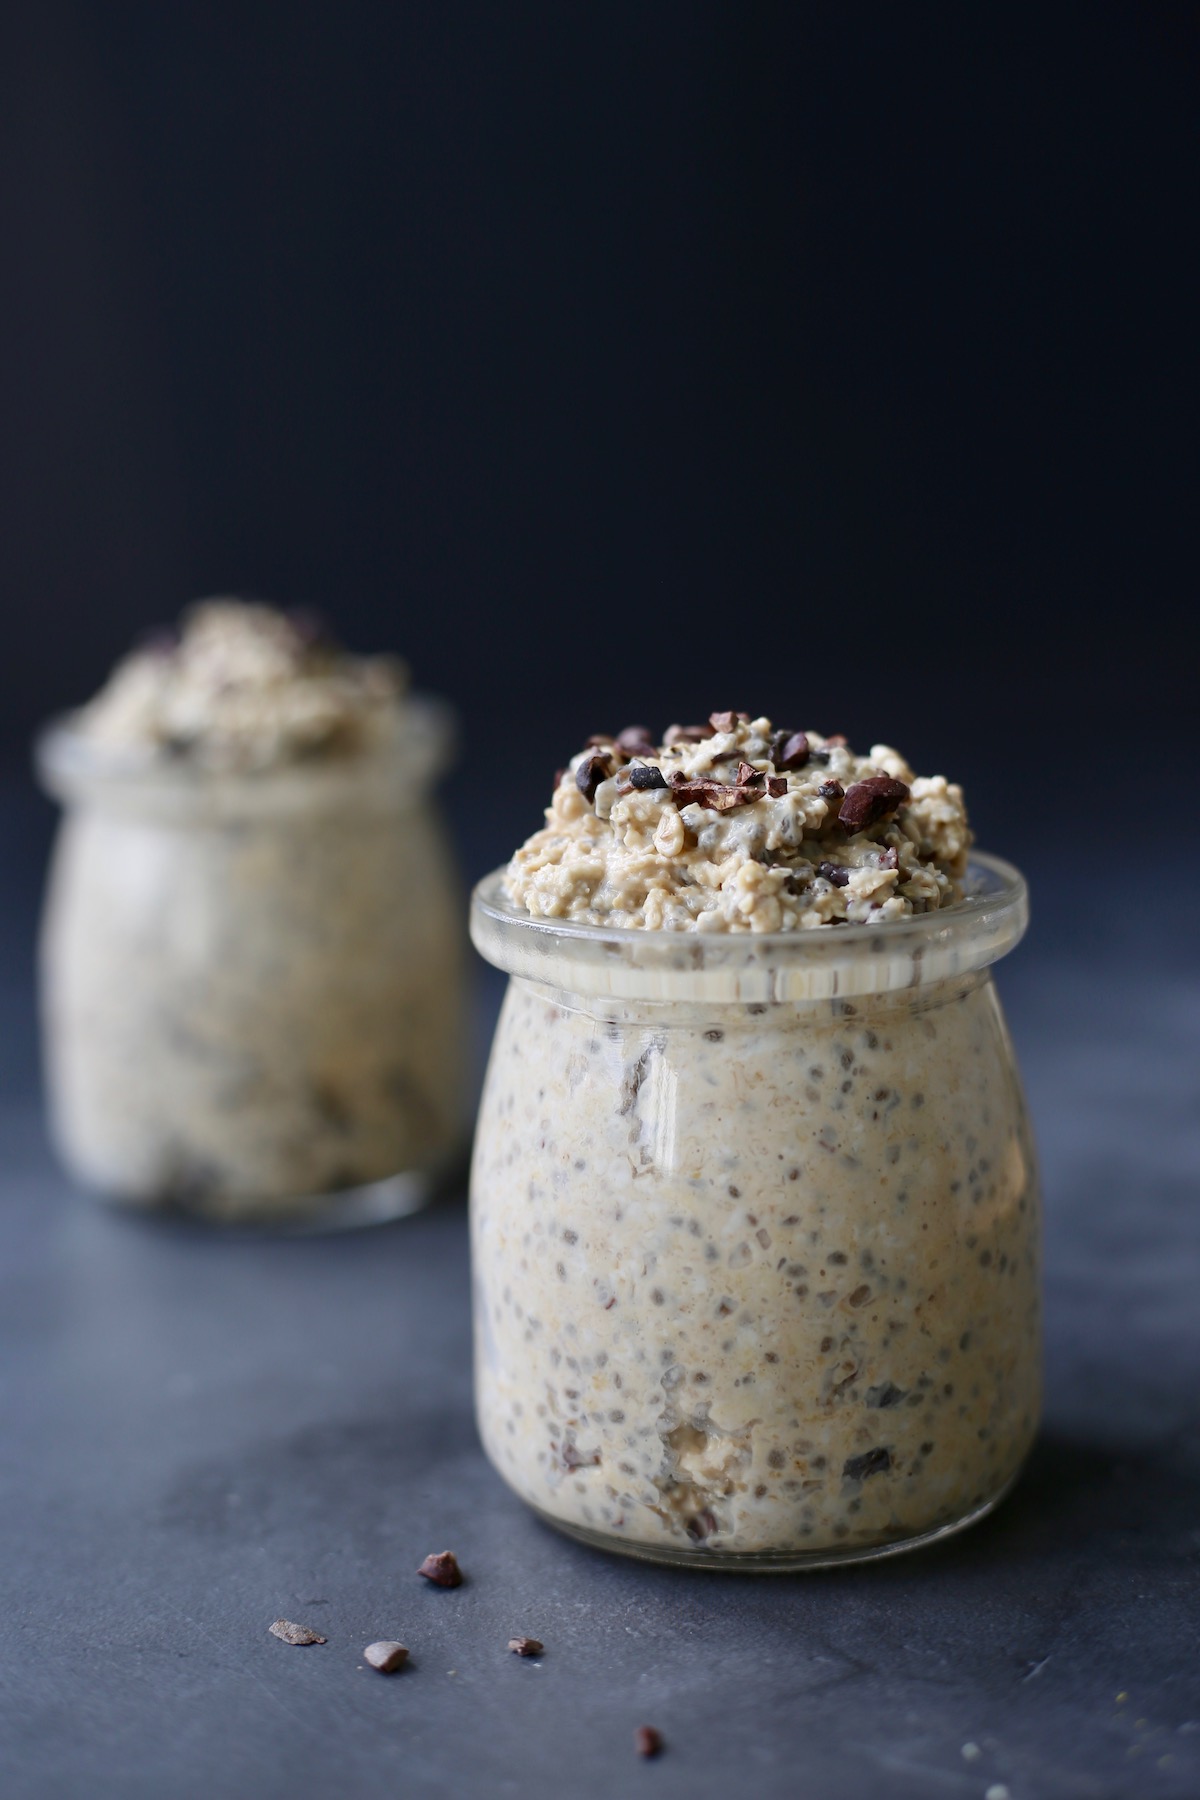 Healthy Cookie Dough Overnight Oats - The Conscientious Eater